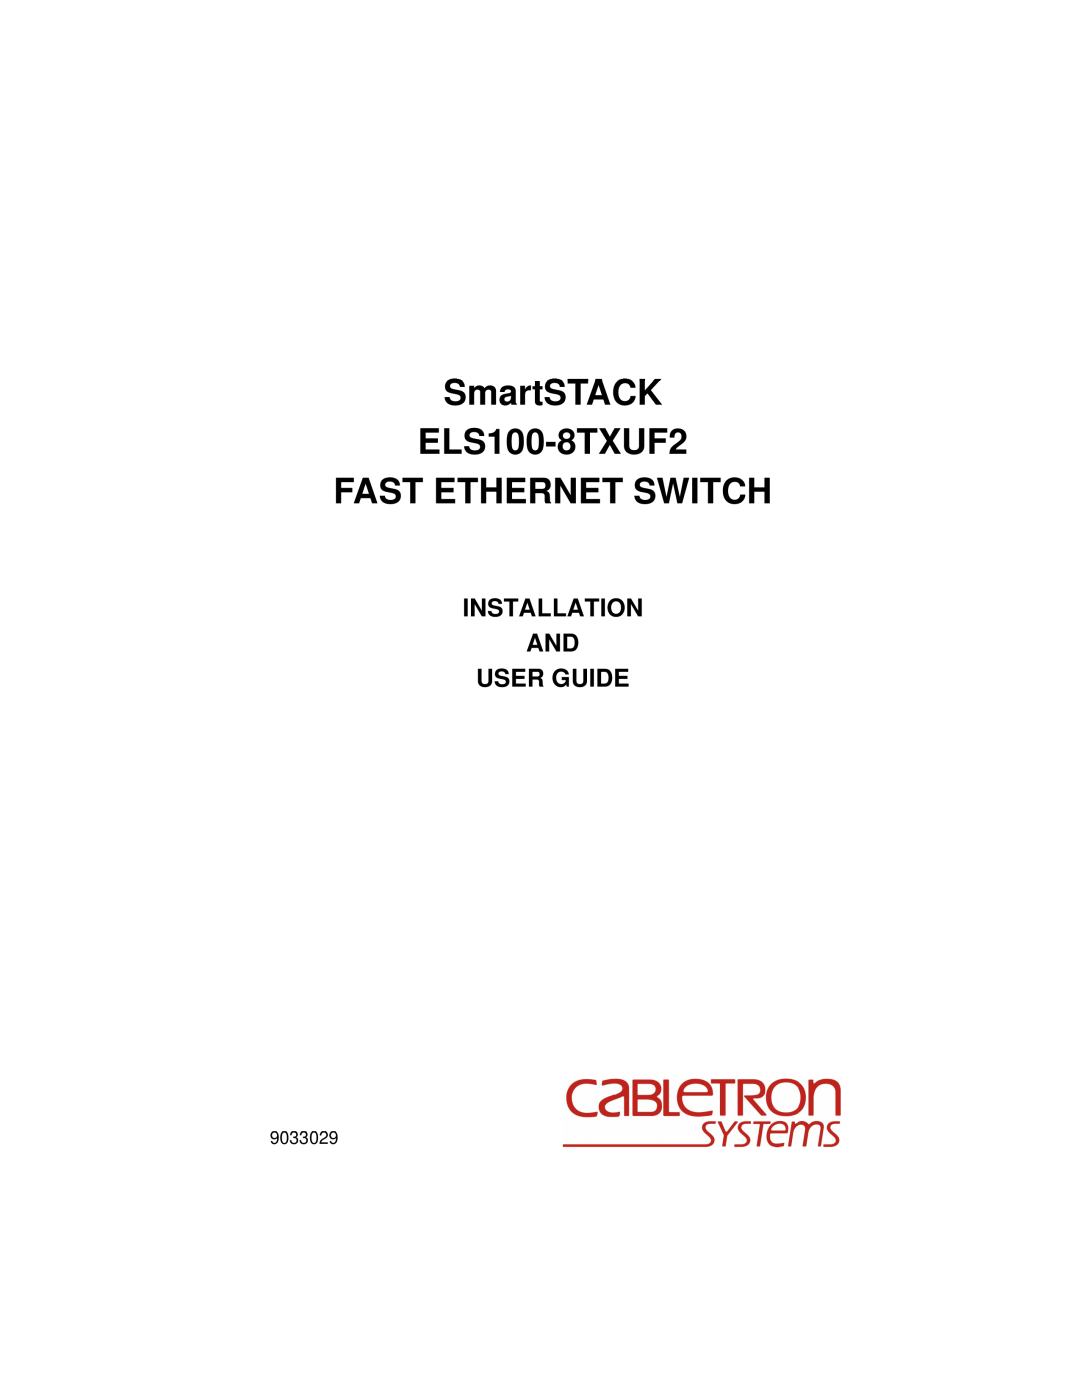 Cabletron Systems manual Installation And User Guide, 9033029, SmartSTACK ELS100-8TXUF2 FAST ETHERNET SWITCH 